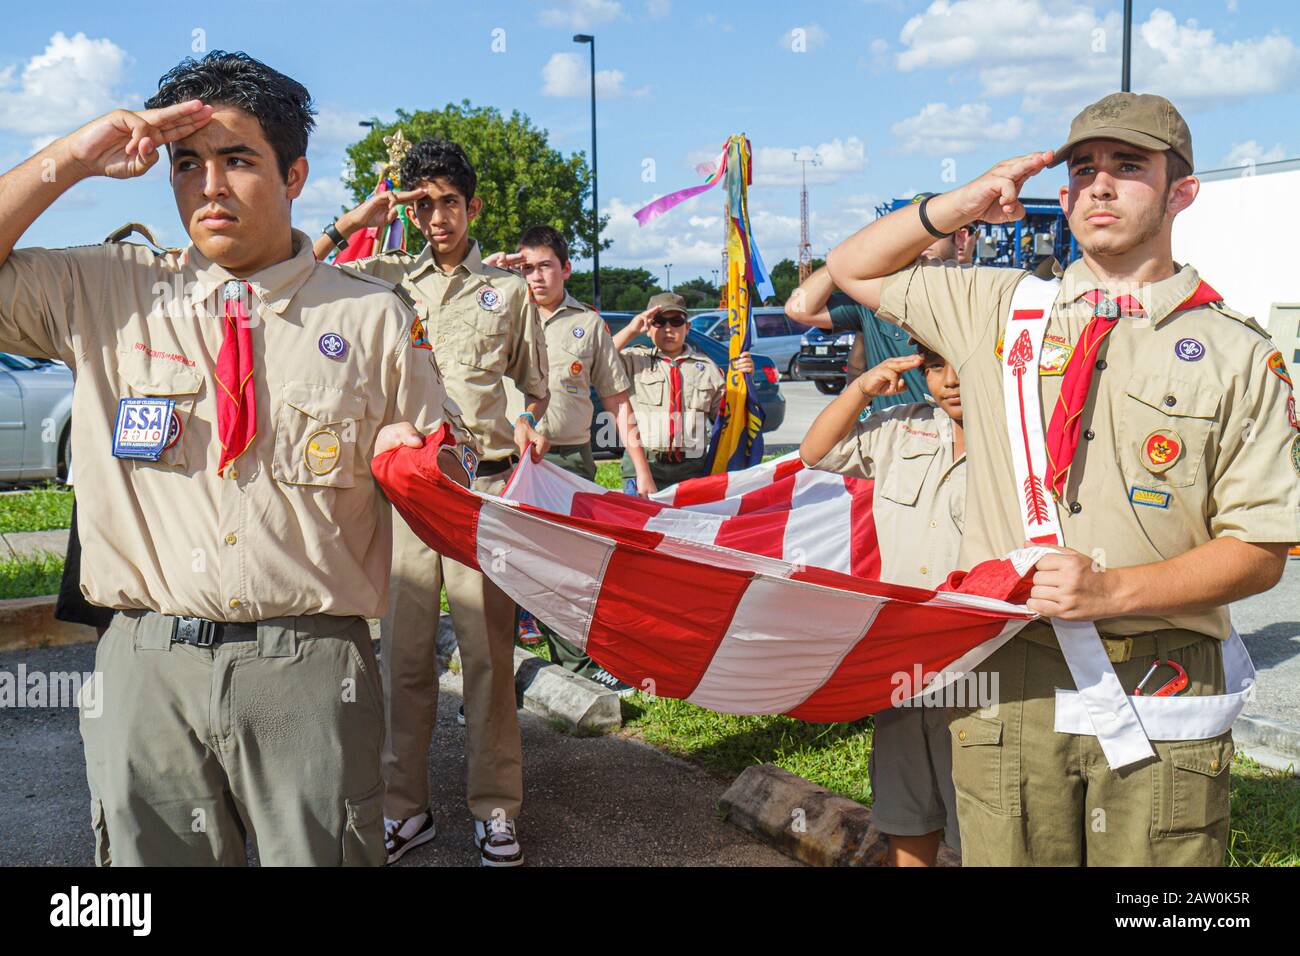 Miami Florida,Arts in the Street,Independence of Central America & Mexico Cultural Integration Day,Hispanic Boy Scout,boy,teen teens teenager teenager Stock Photo